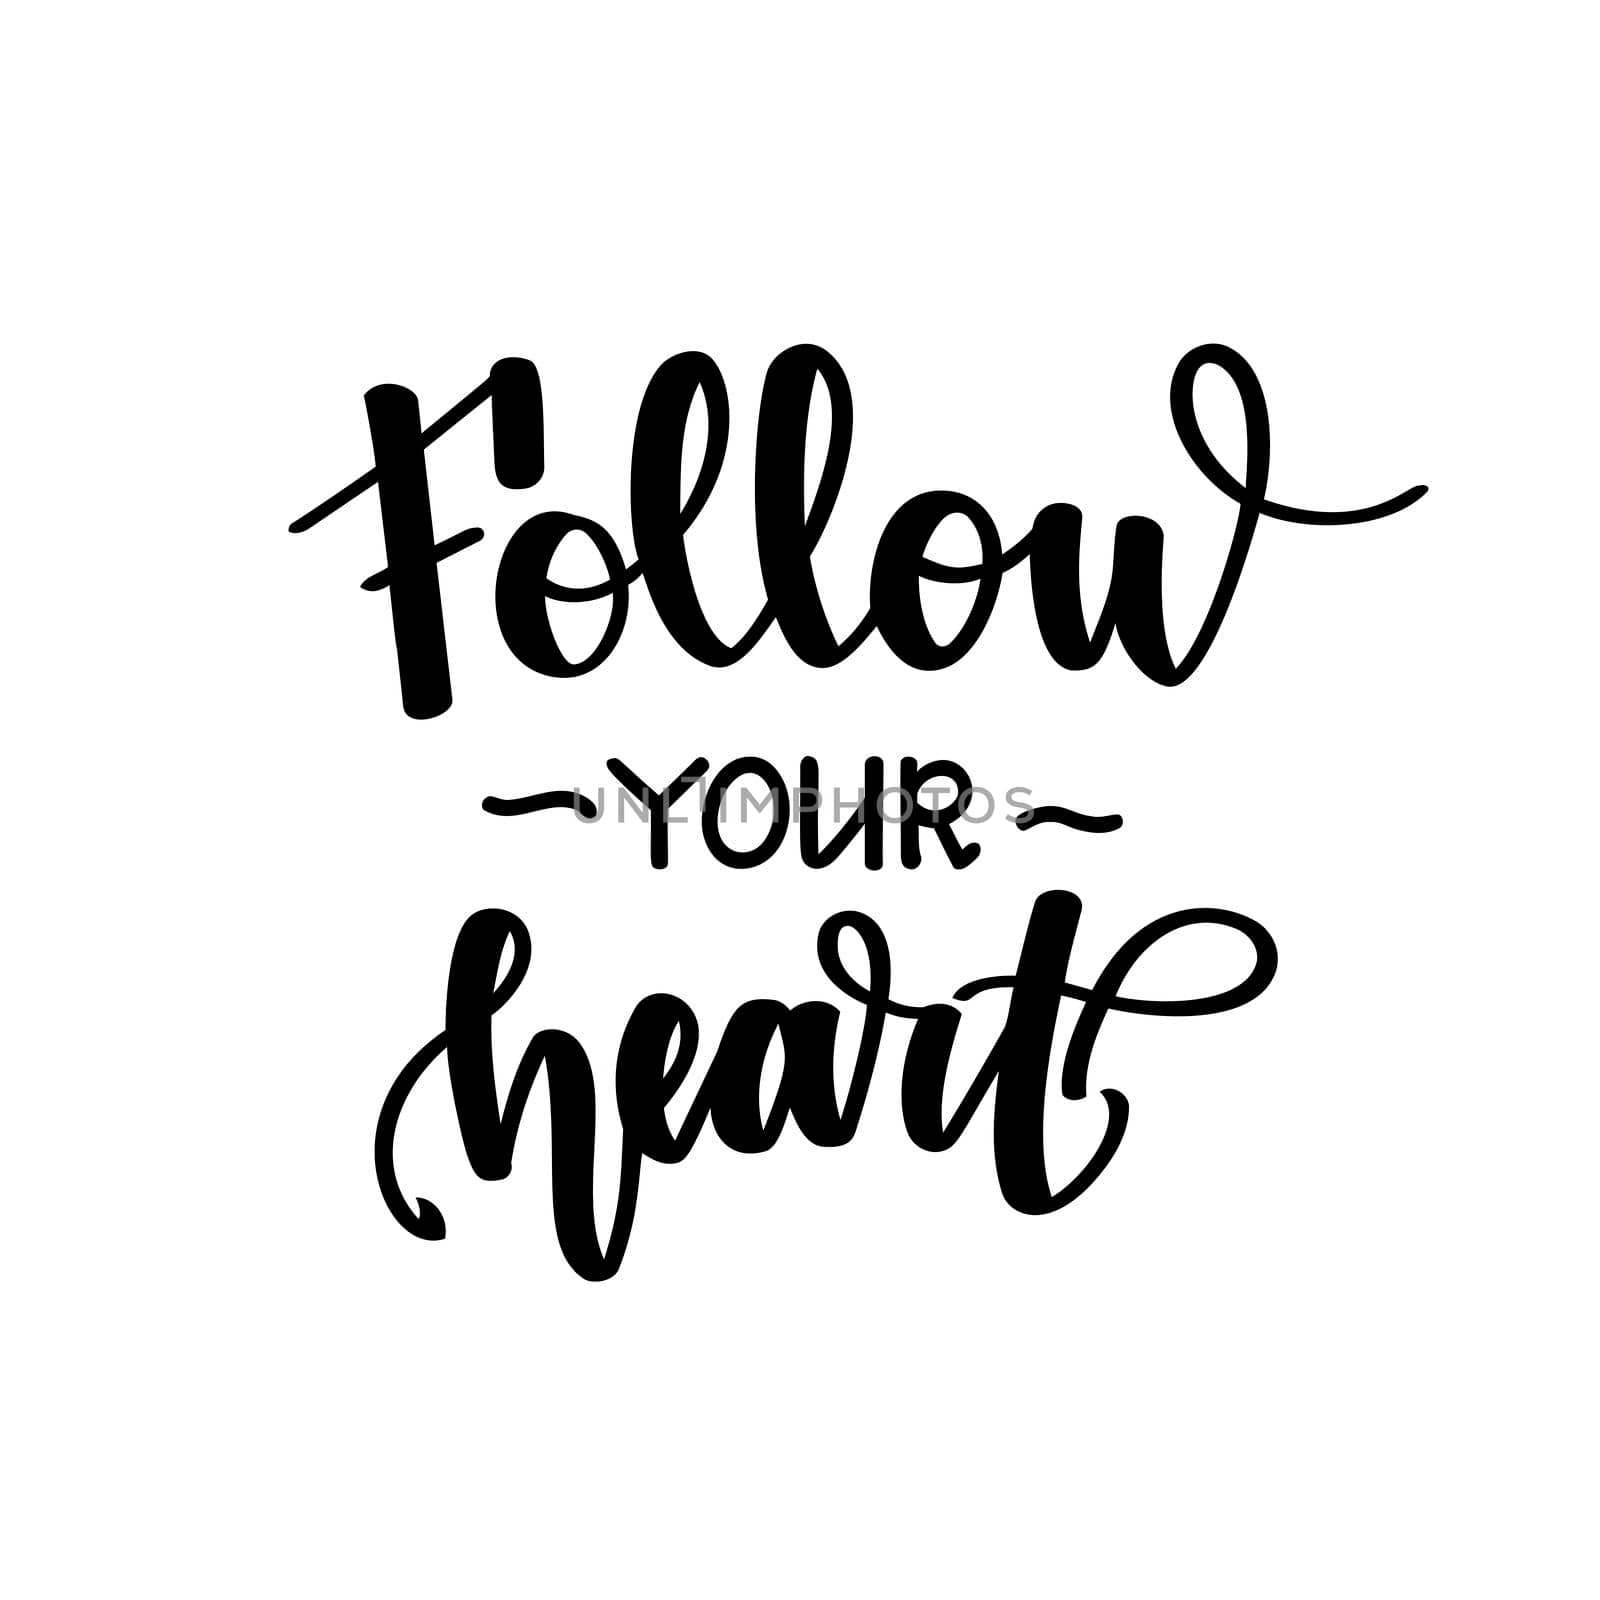 Follow your heart. Motivational and inspirational handwritten lettering isolated on white background. illustration for posters, cards, print on t-shirts and much more.